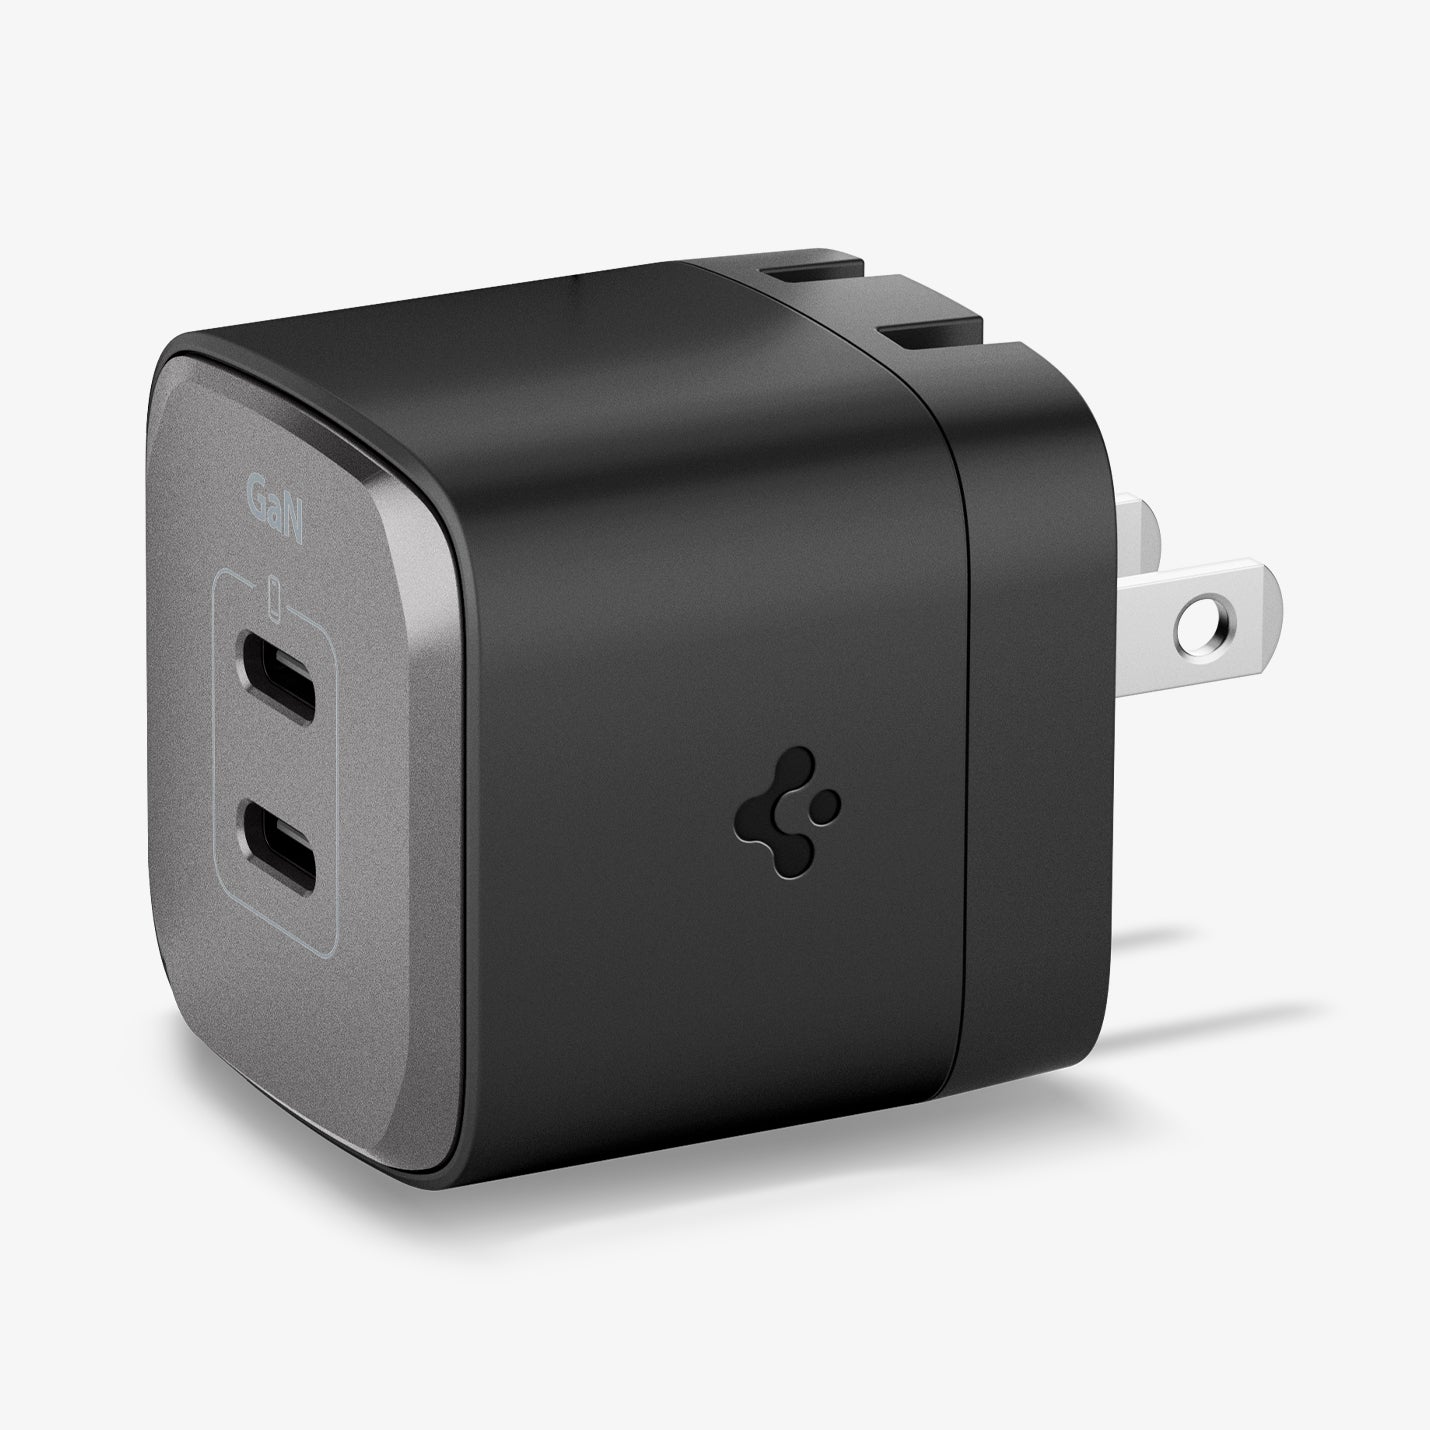 ACH05142 - ArcStation™ Pro GaN 352 Dual USB-C Wall Charger PE2202 in Midnight Black showing the front, sides and partial power plug